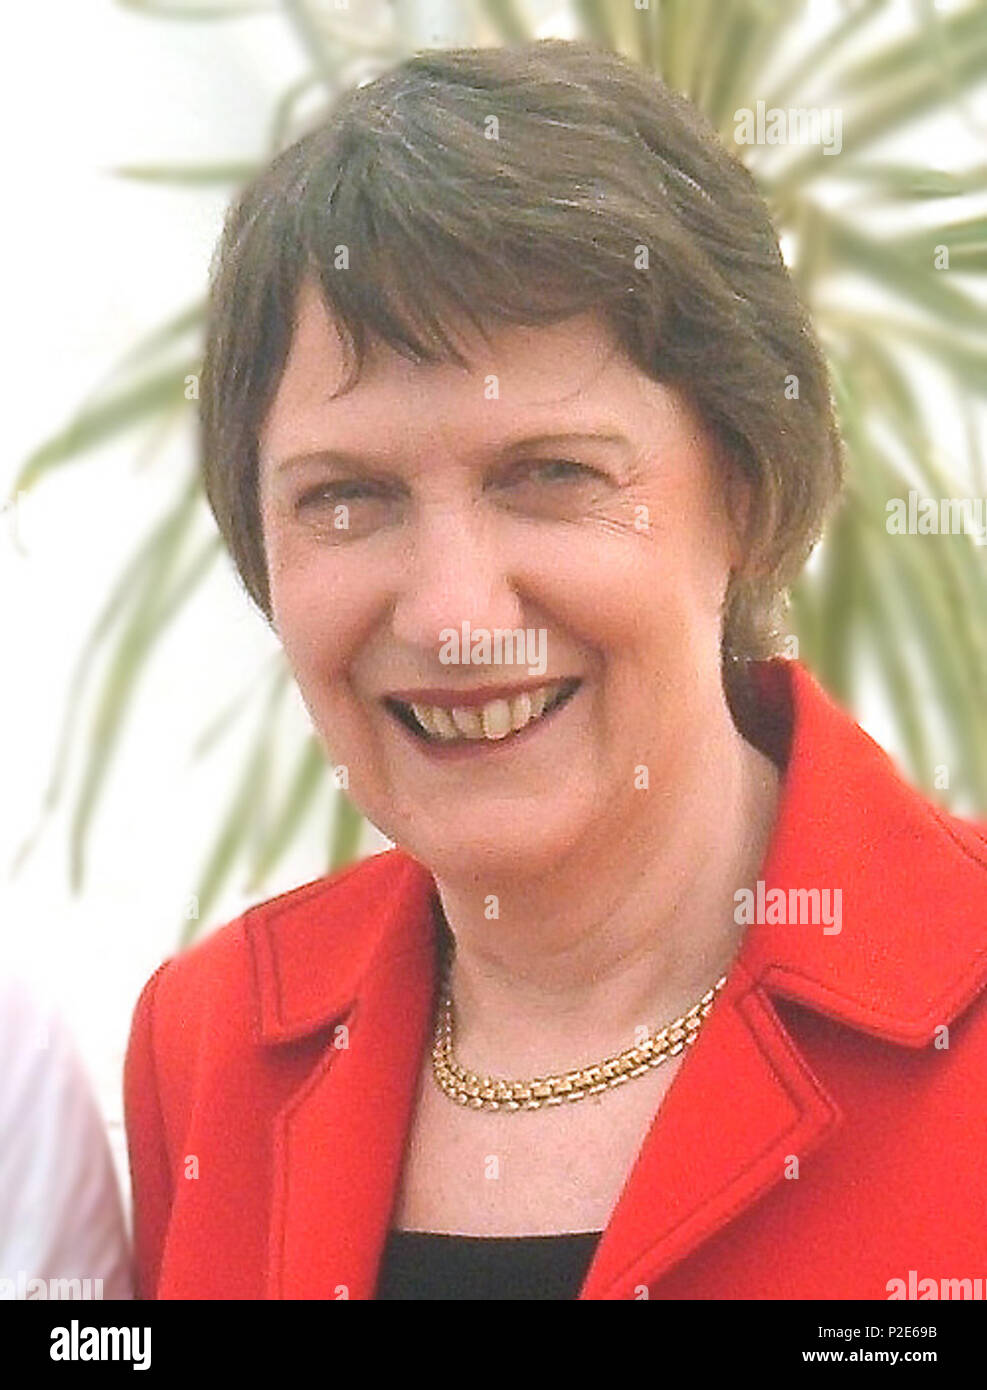 . English: Incorporates changes to existing photo. Cropped slightly, background softened, and contrast fixed. The actual subject, Ms Clark, has NOT been altered in any way . 8 March 2008 (original upload date). Same as person who uploaded the original which was File:Prime Minister Helen Clark.jpg 43 Prime Minister Helen Clark1 Stock Photo